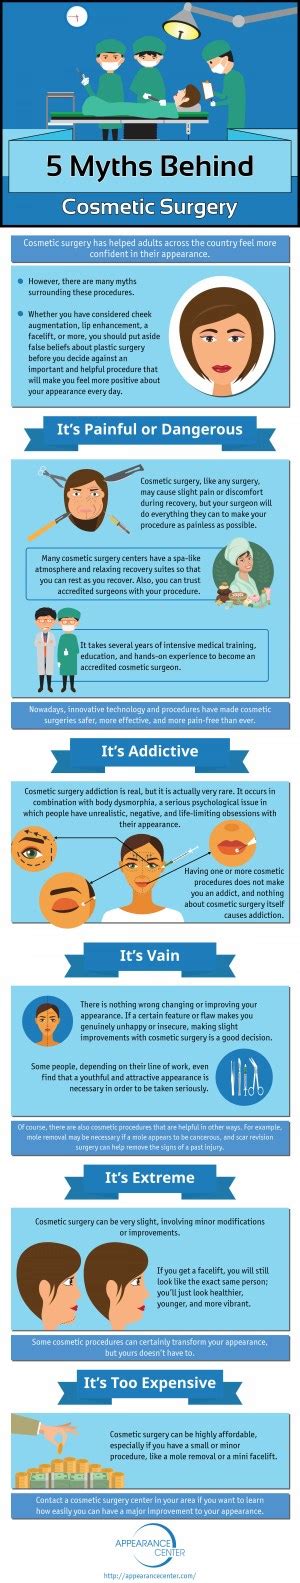 5 Myths You Believed About Cosmetic Surgery Busted Infographic